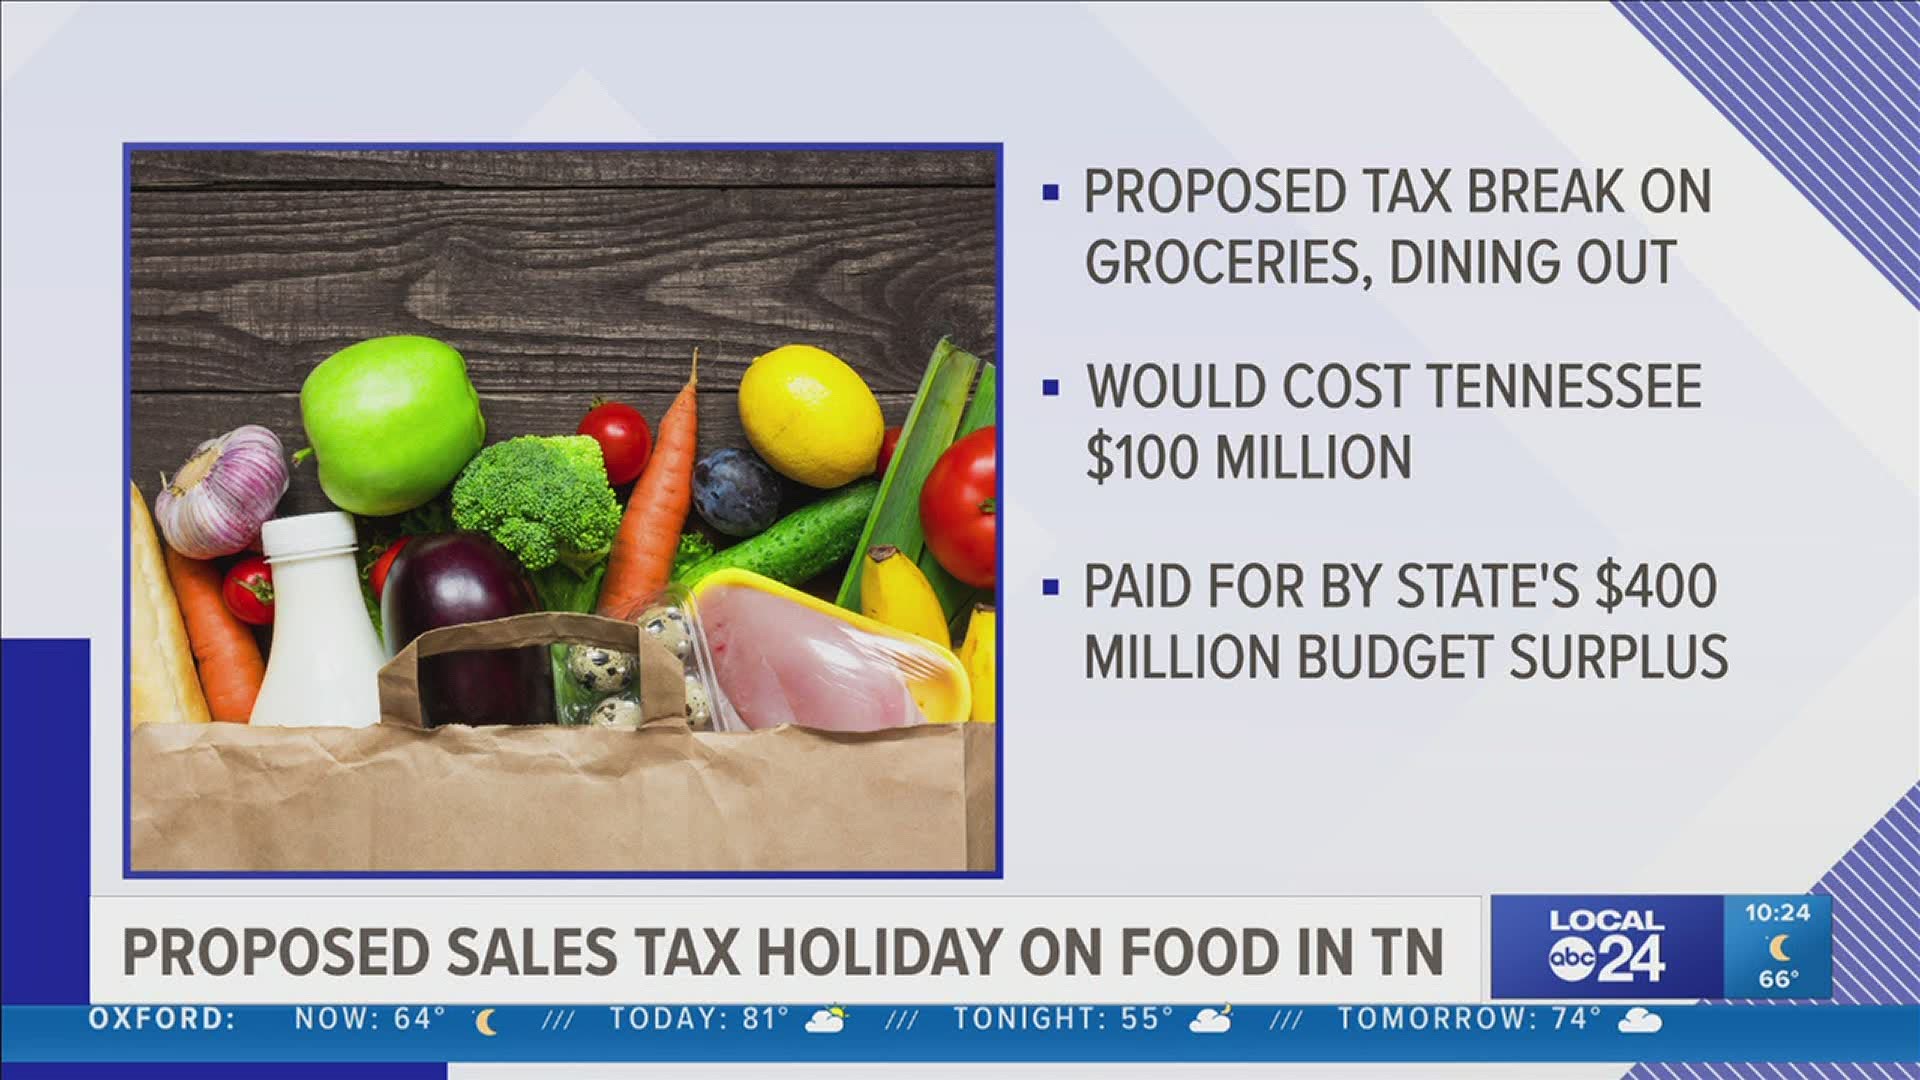 Tennessee may temporarily eliminate tax on groceries